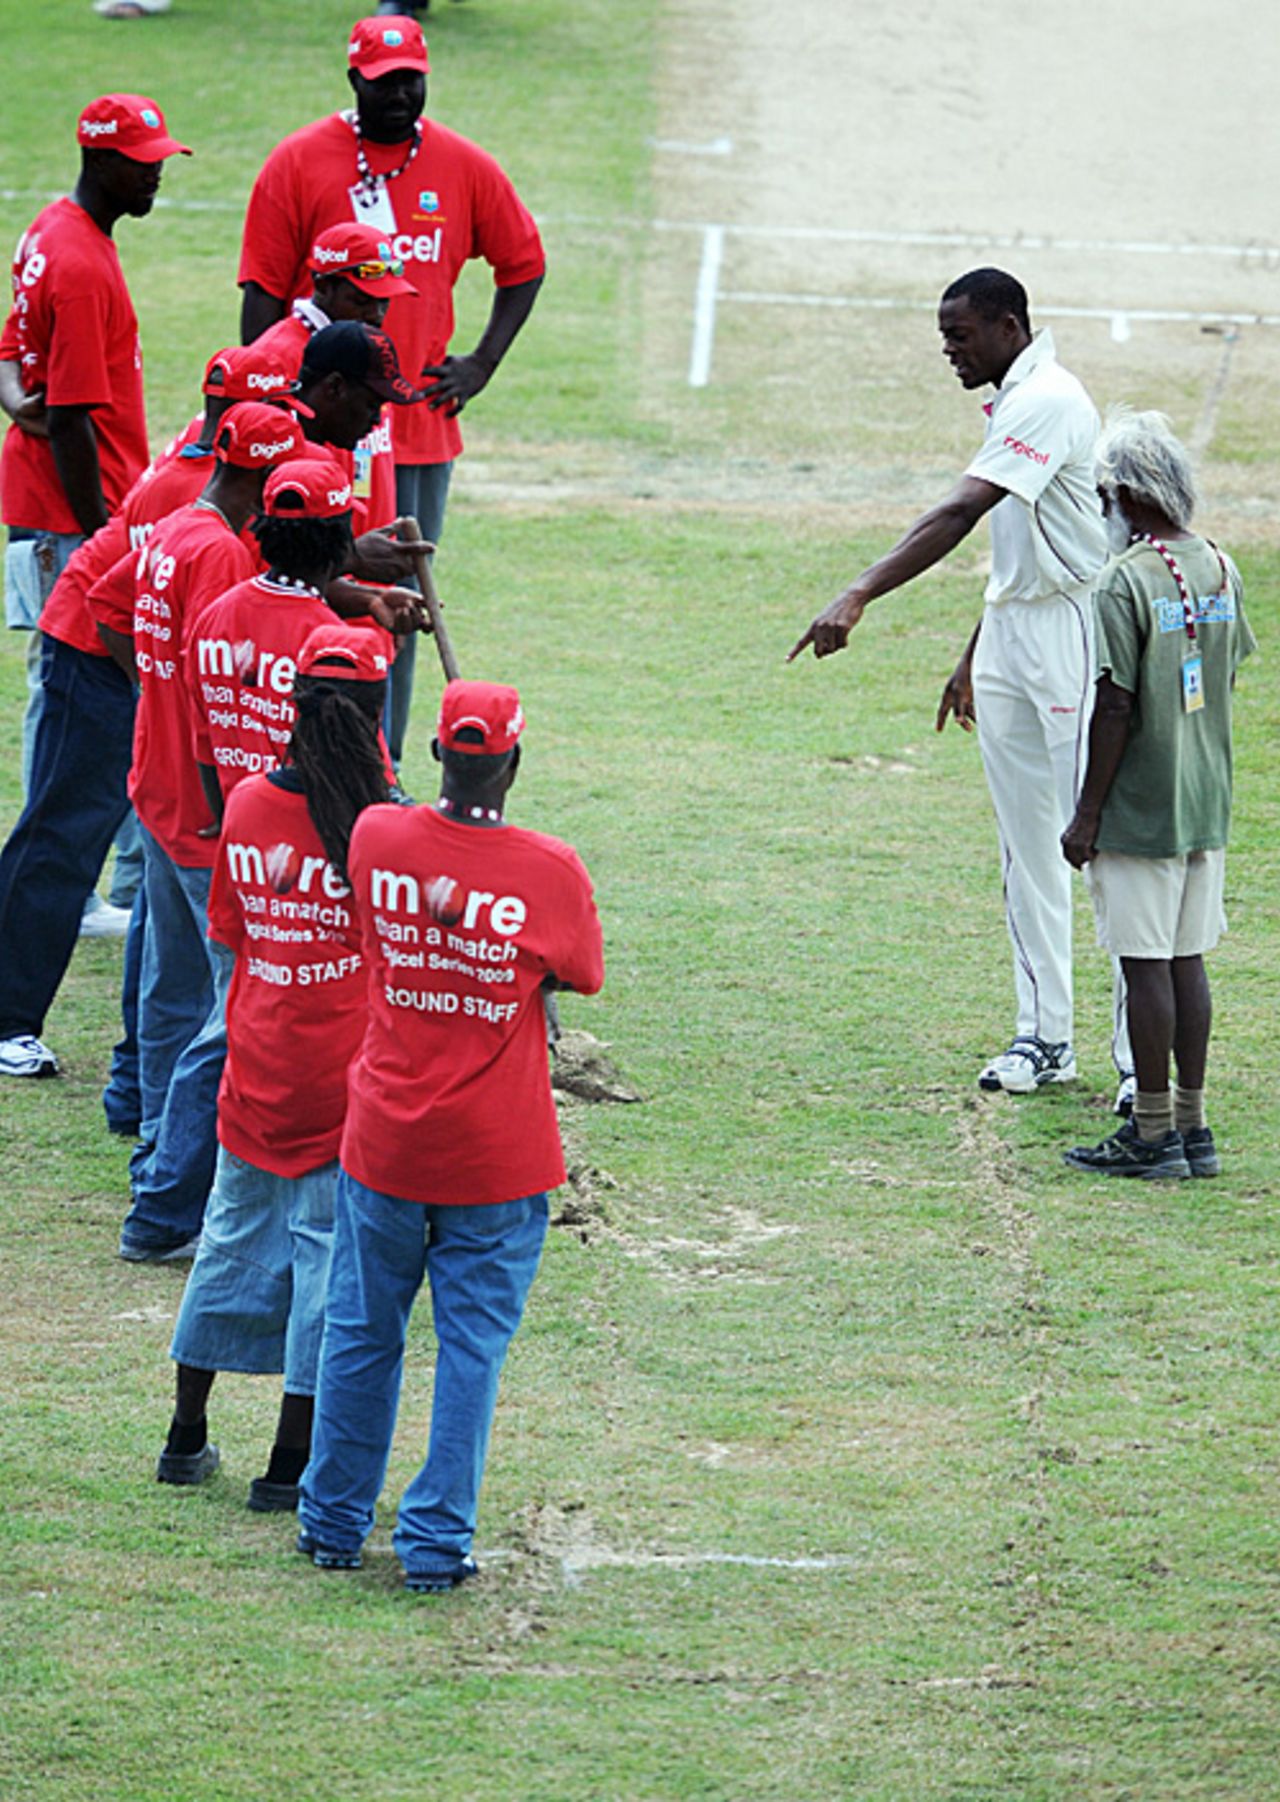 Daren Powell points to a suspect part of the bowlers' run-up on a farcical day in Antigua, West Indies v England, 2nd Test, St. Johns, Antigua, February 13, 2009